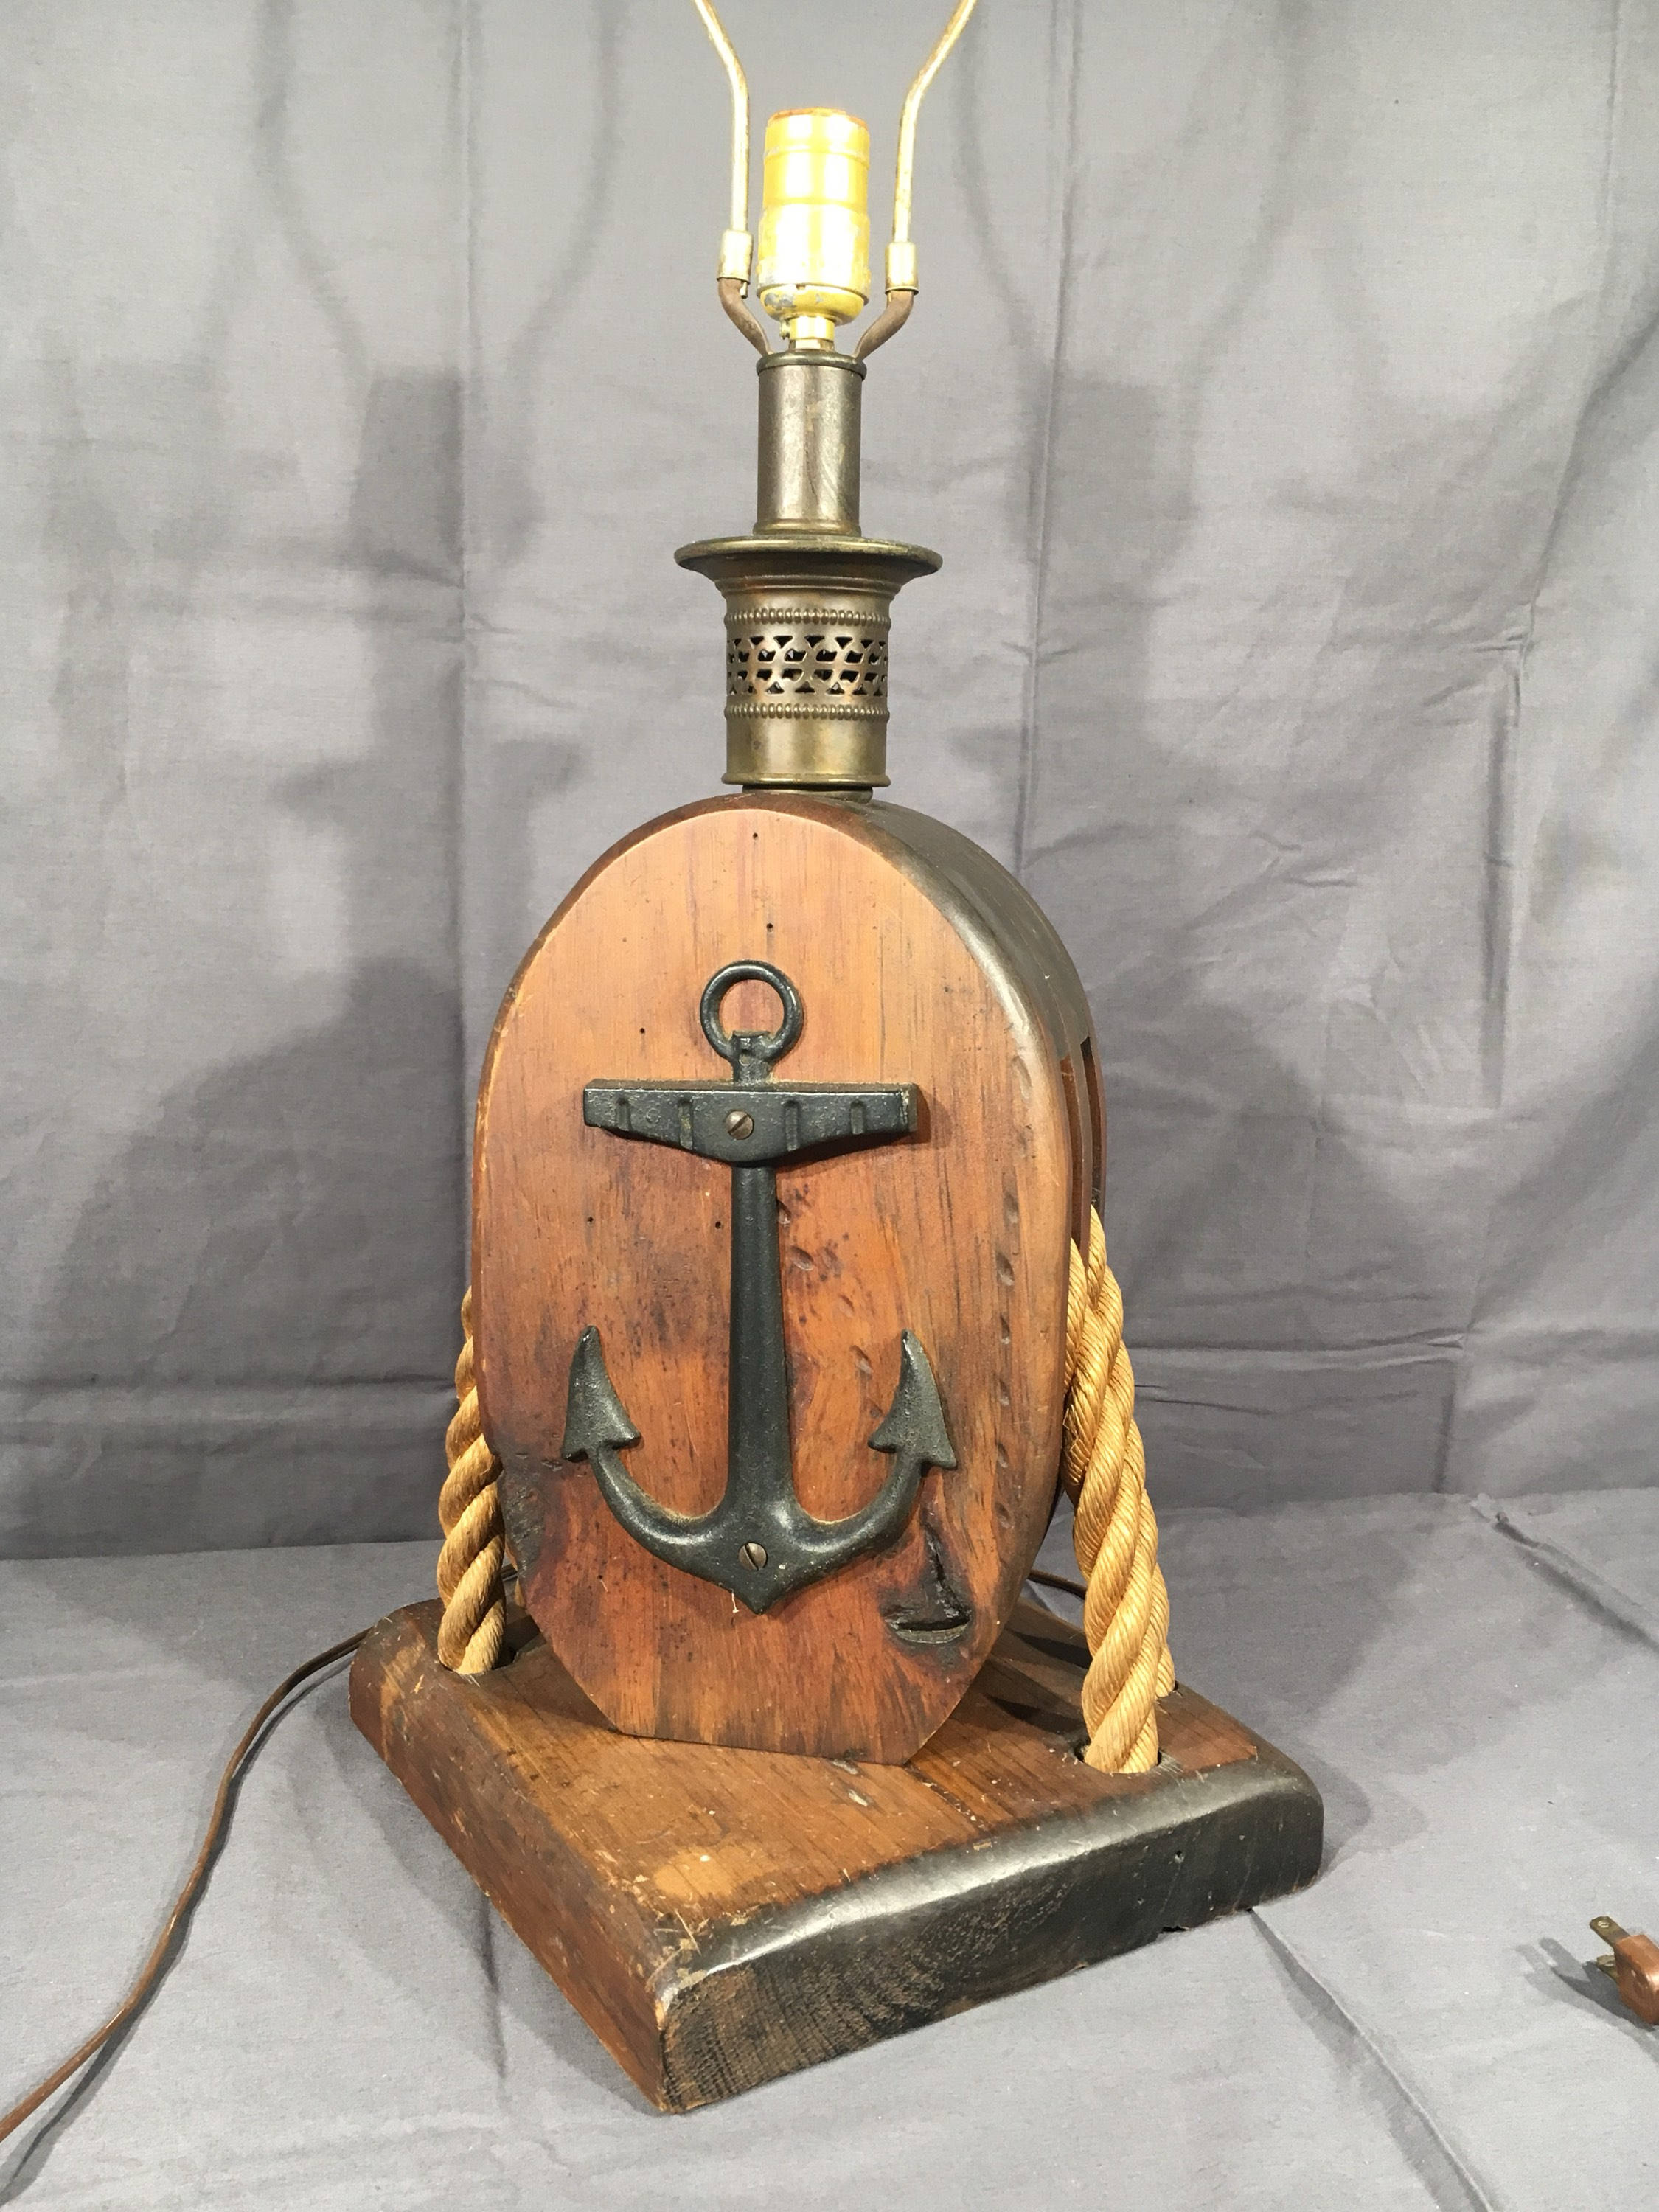 vintage anchor lamp pulley block rope accent light decorative fullxfull nautical table lamps brown cast iron wood statue tackle ship decor balcony sets outdoor furniture istikbal